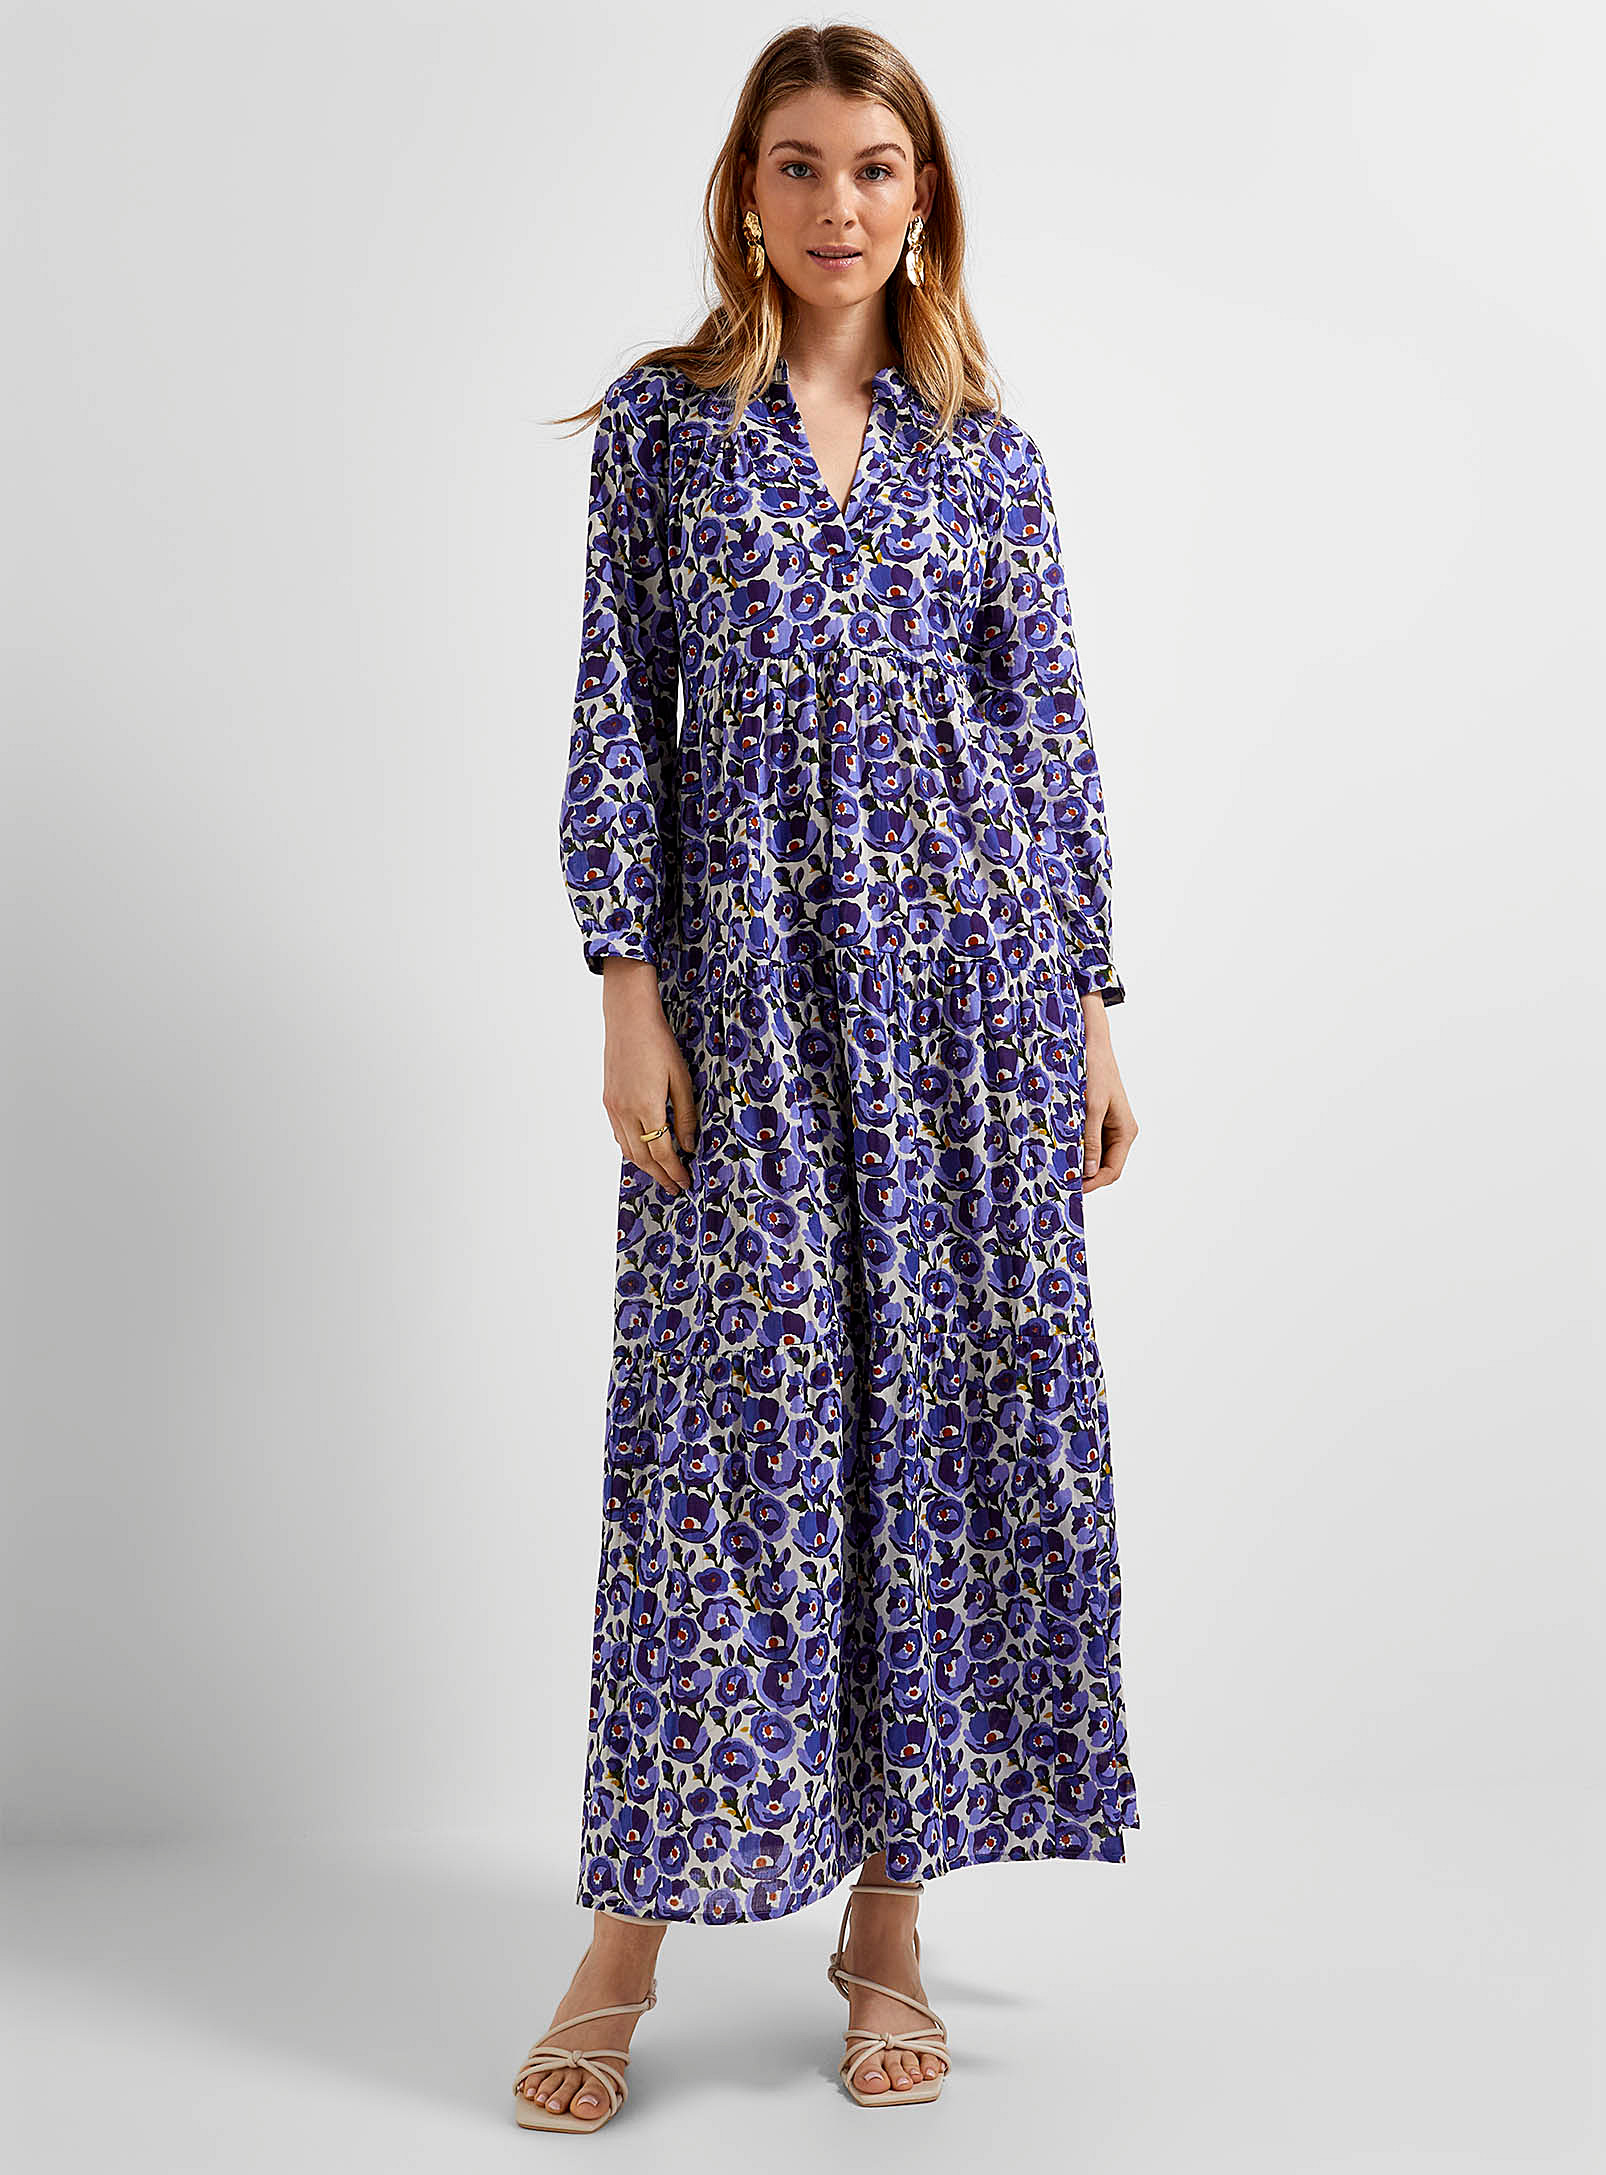 Contemporaine Summer Flowers Tiered Dress In Patterned Blue